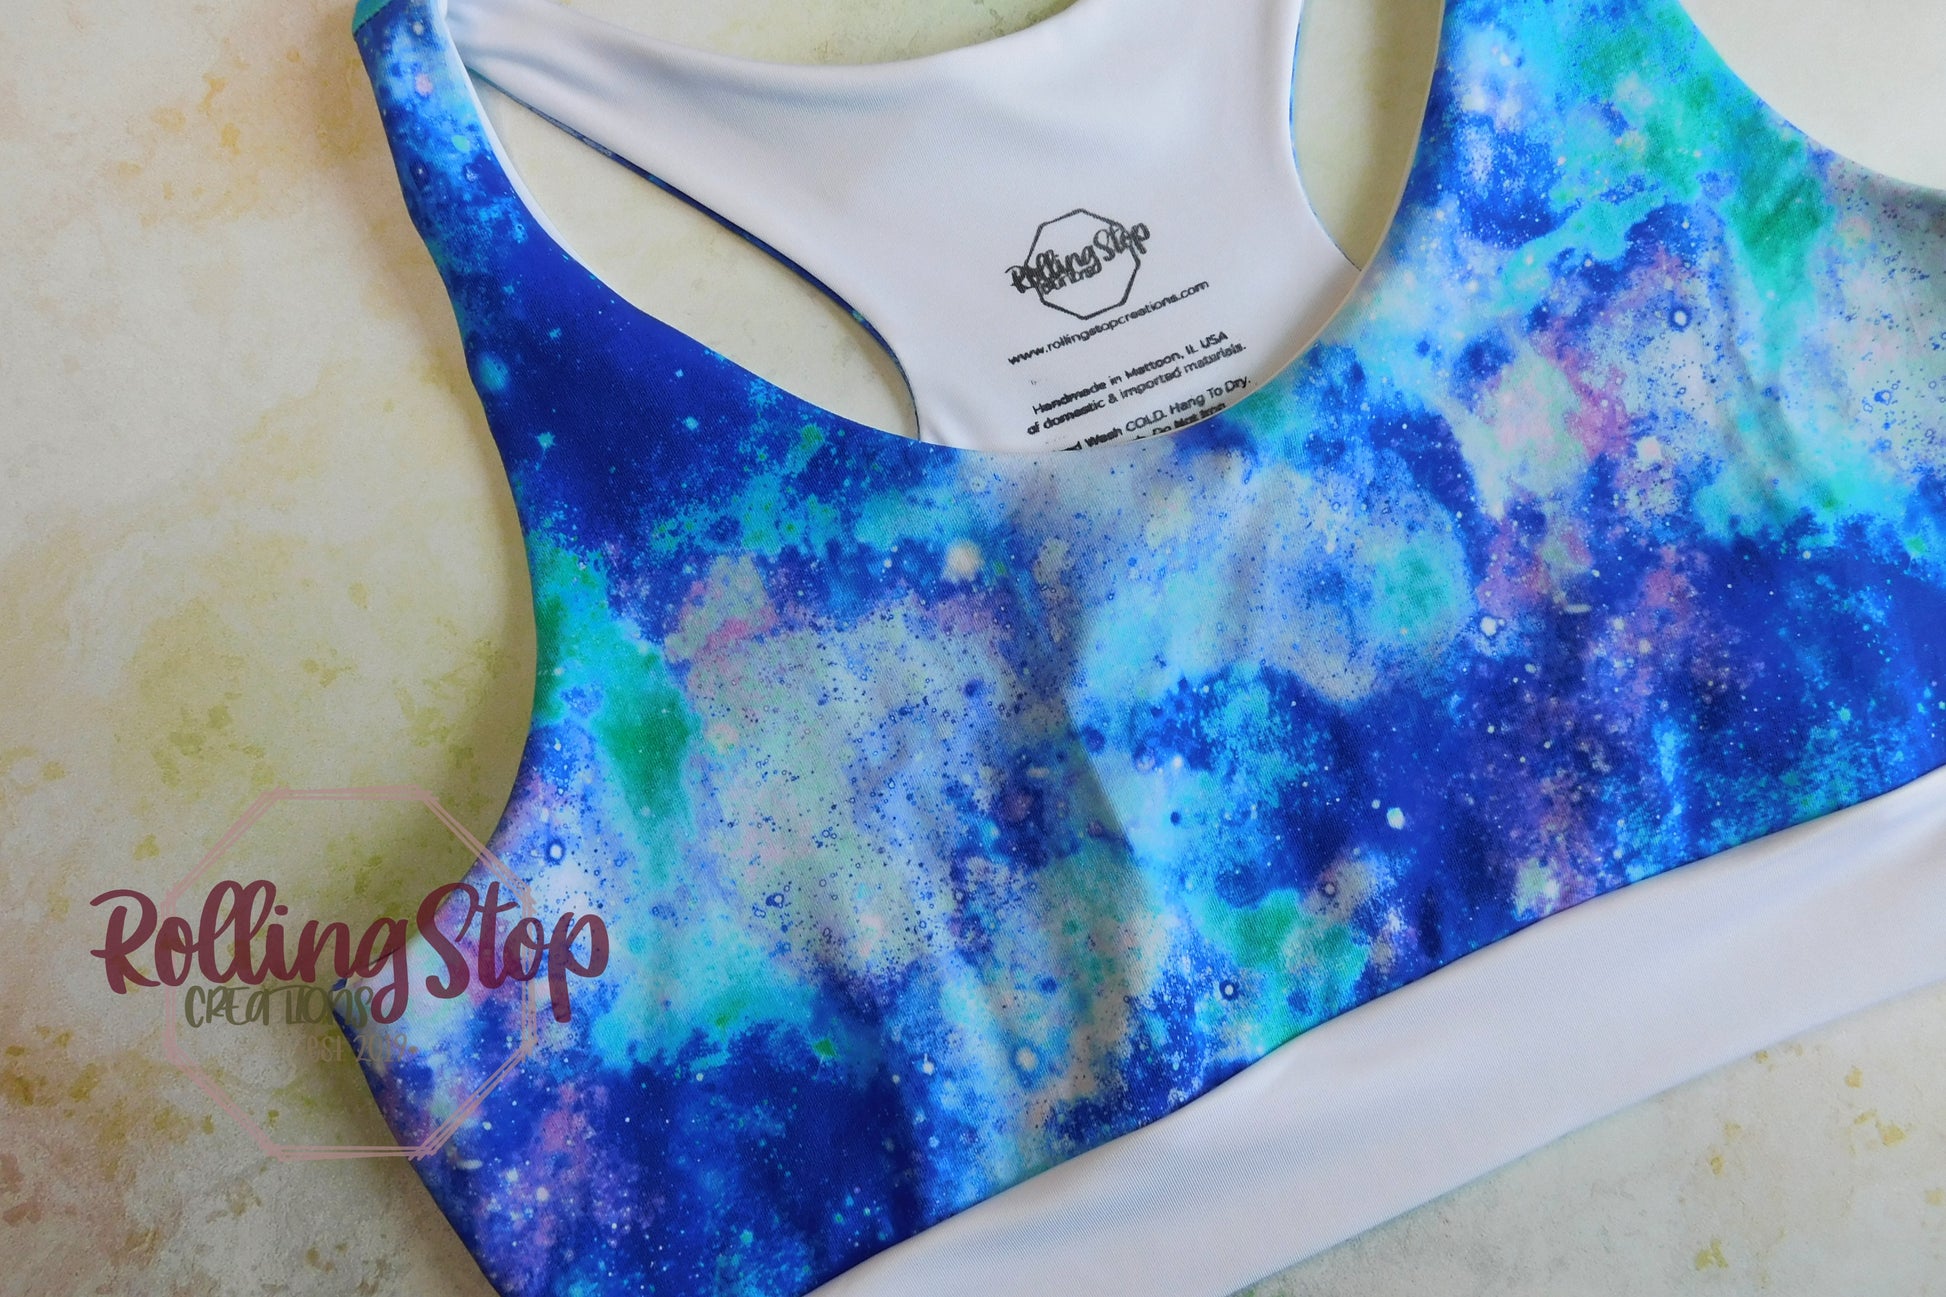 Ocean Galaxy Comfy Bra by Rolling Stop Creations sold by Rolling Stop Creations Comfy Bra - Comfy Clothes - Lingerie